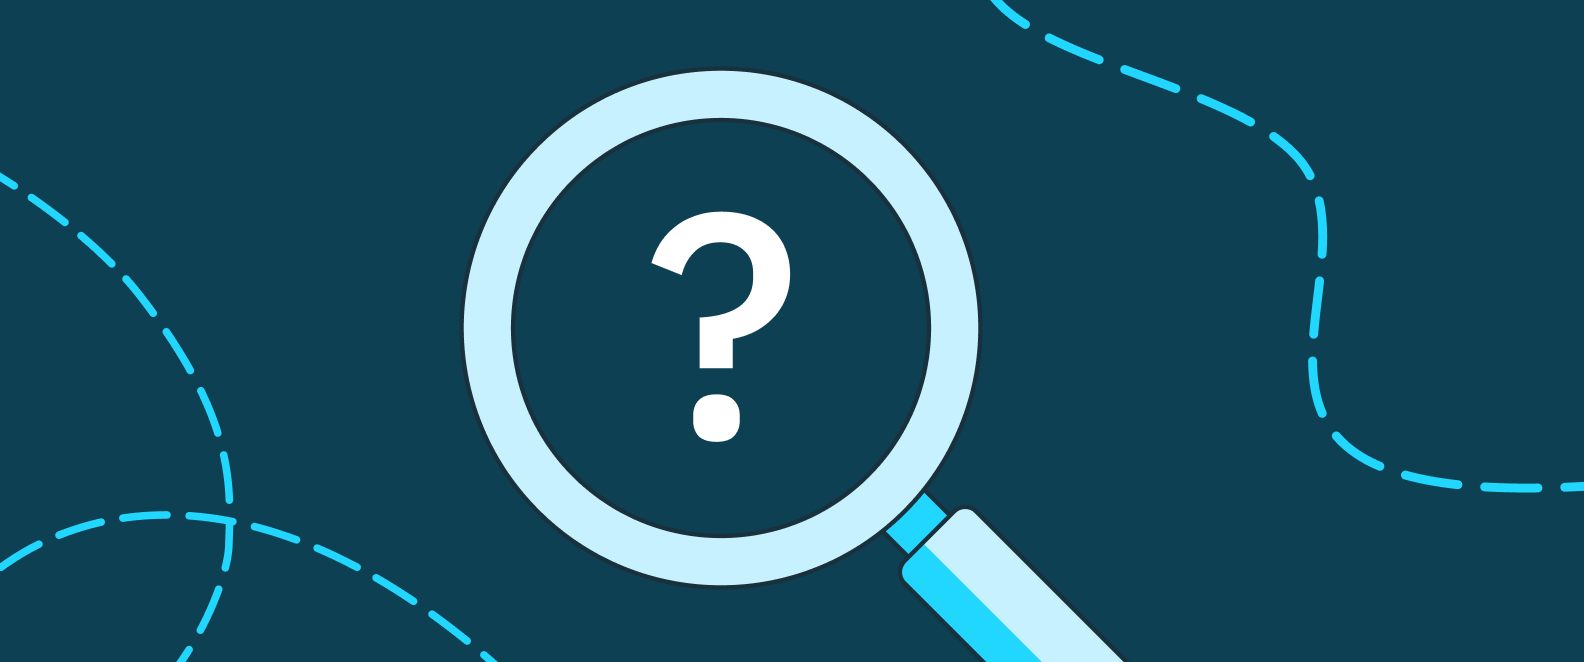 A cartoon of a magnifying glass focused on a question. mark, on a teal background